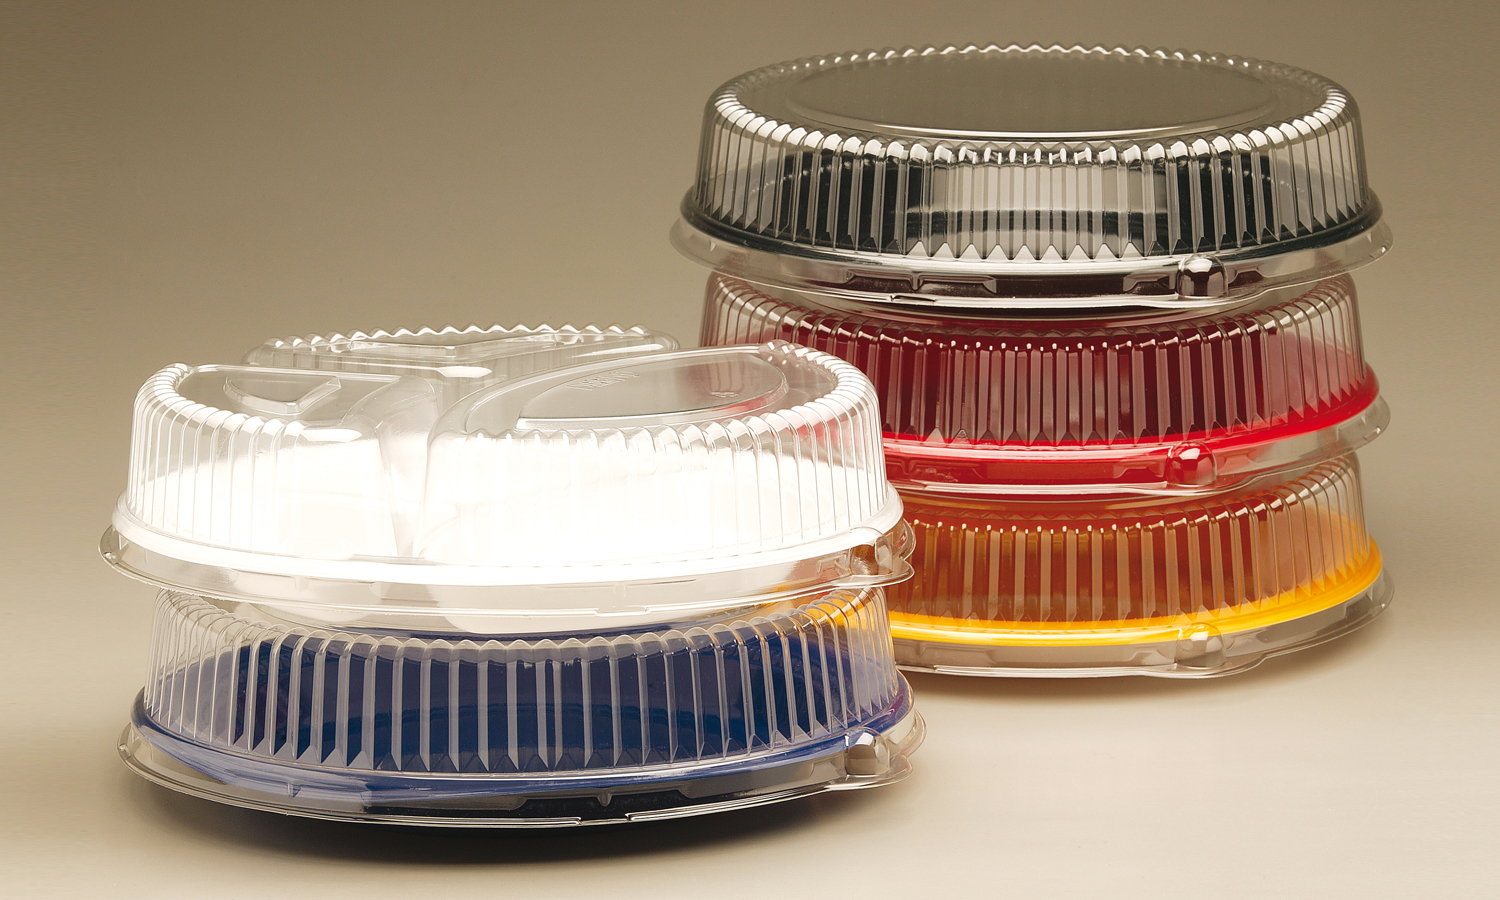 resq® Dome Lids for High Impact Plates